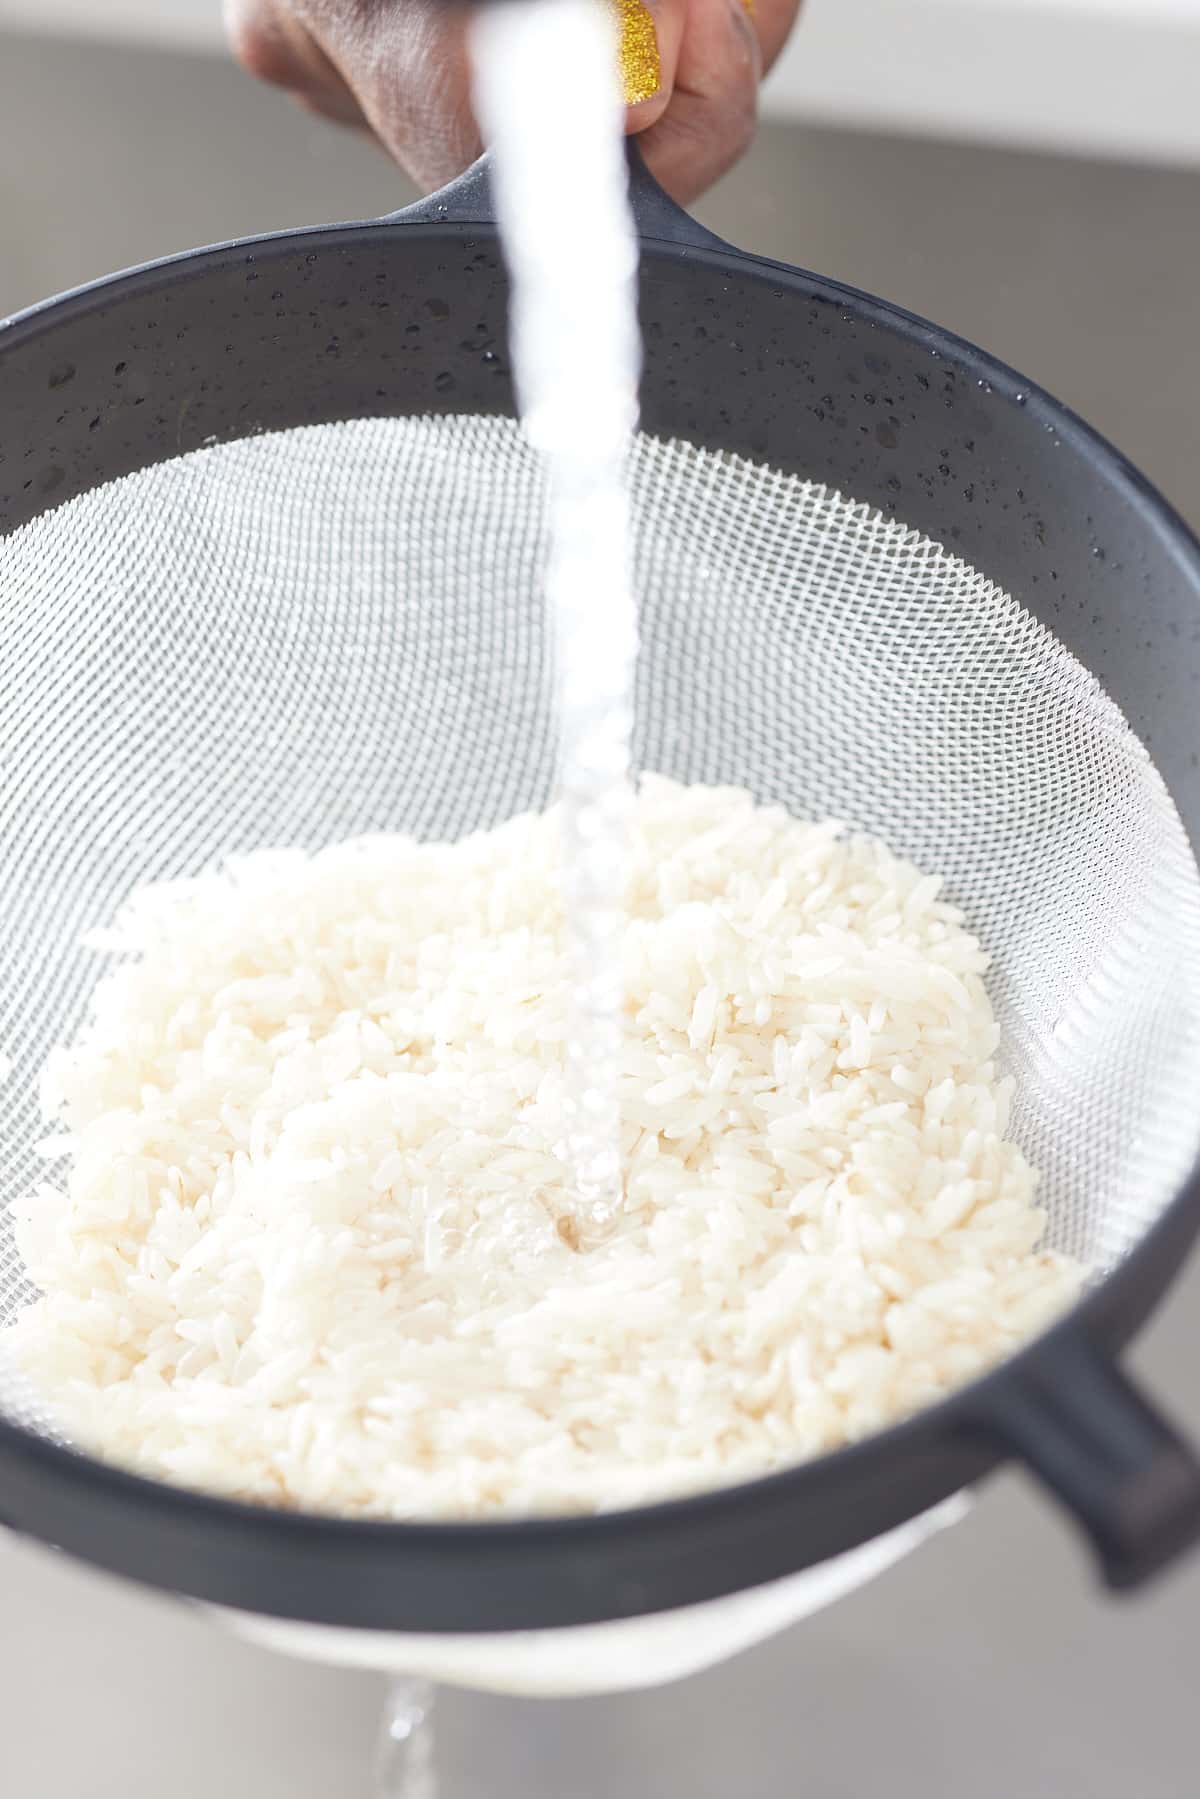 rinsing raw rice in a mesh strainer